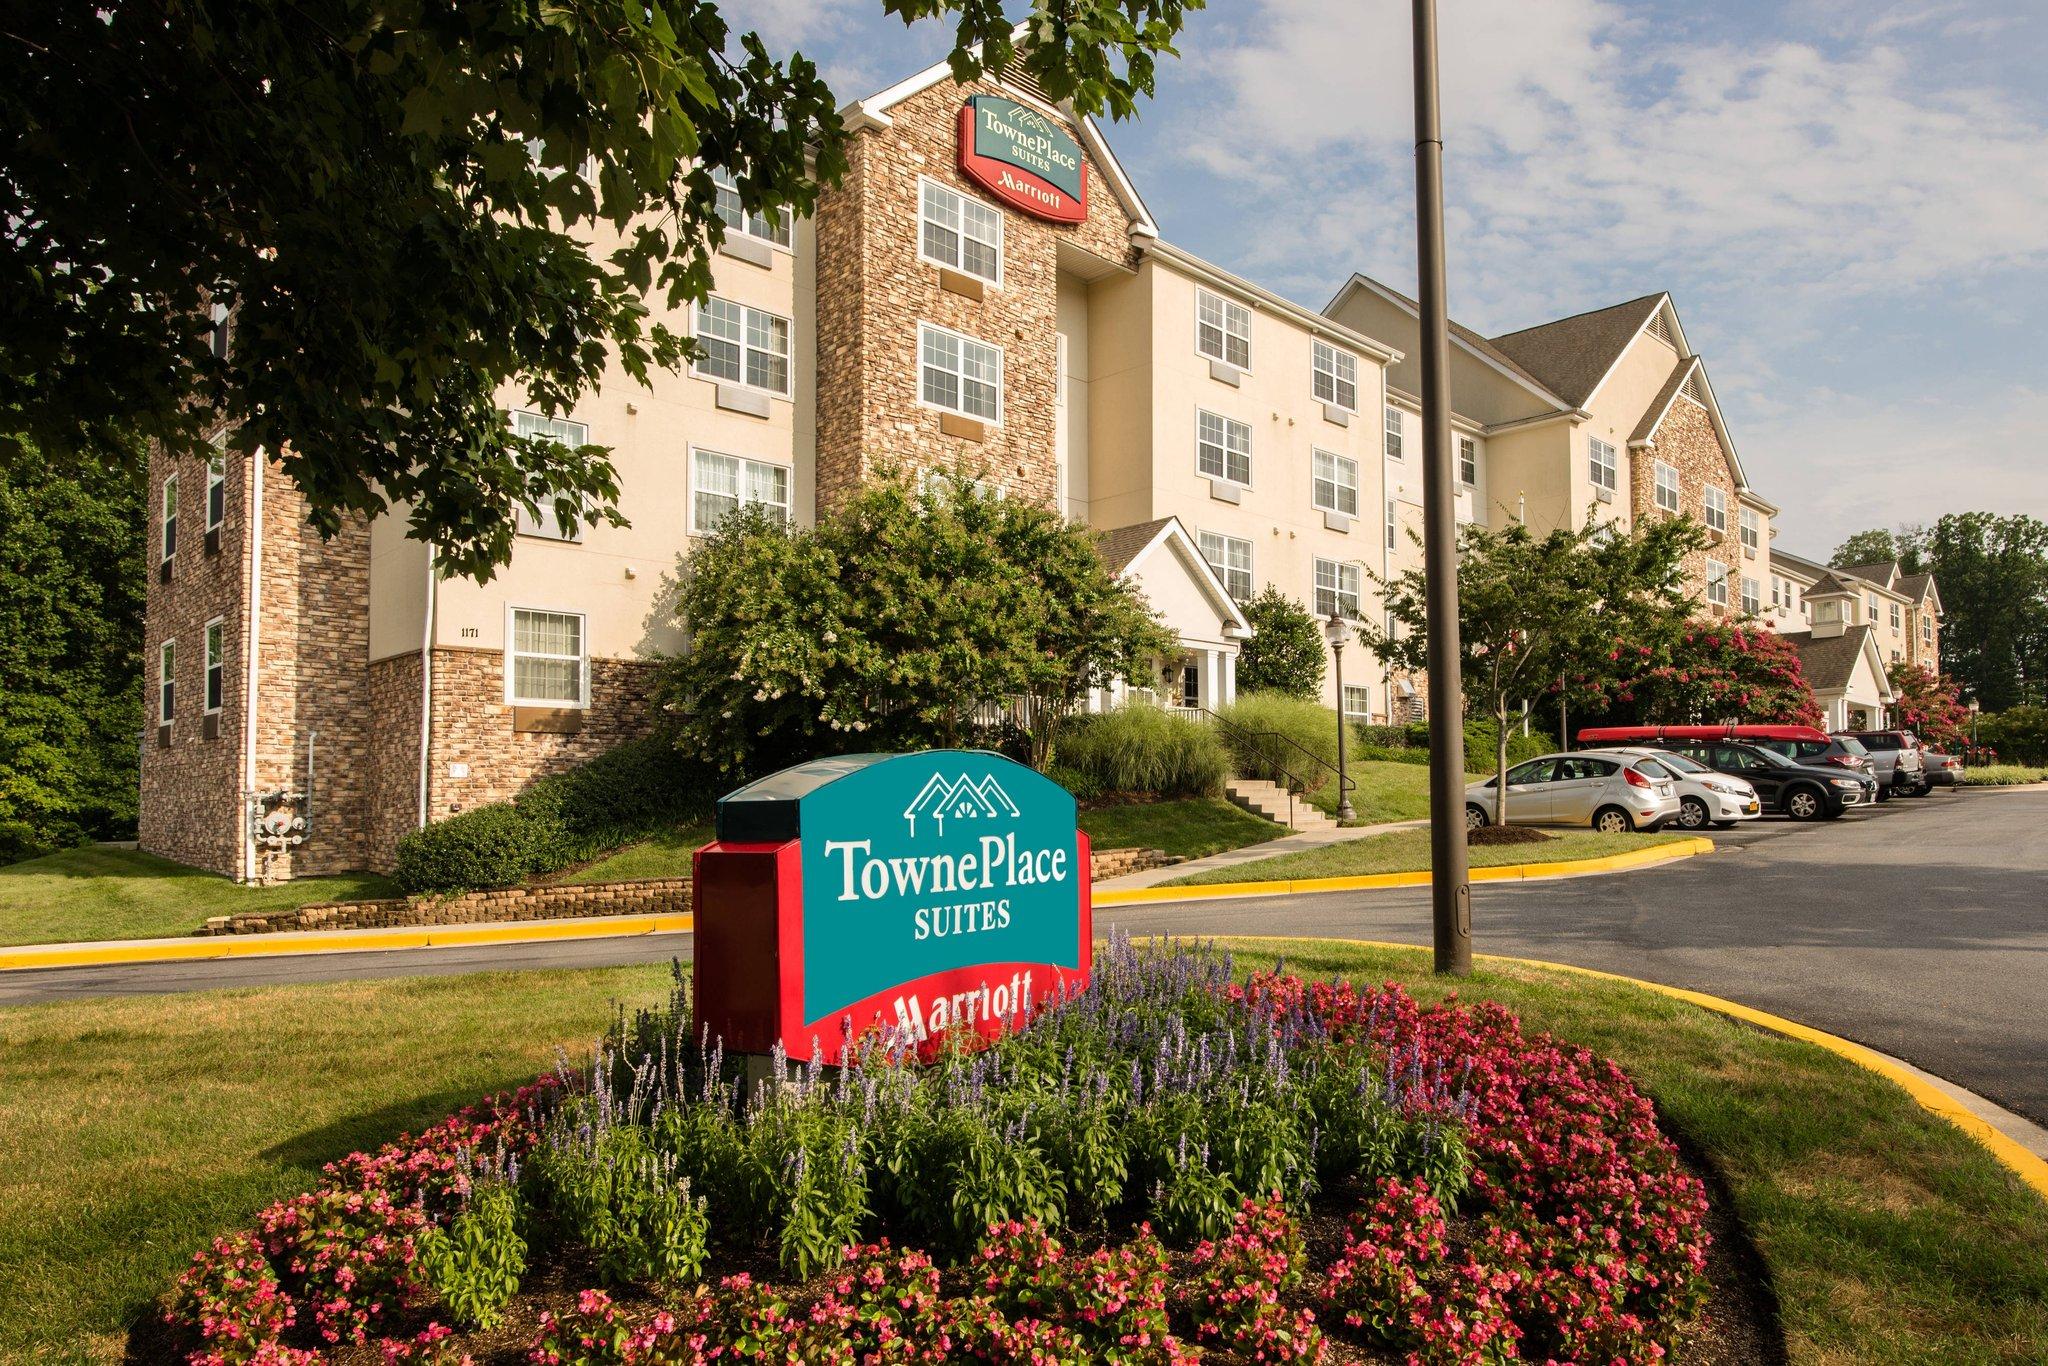 TownePlace Suites Baltimore BWI Airport in Linthicum, MD